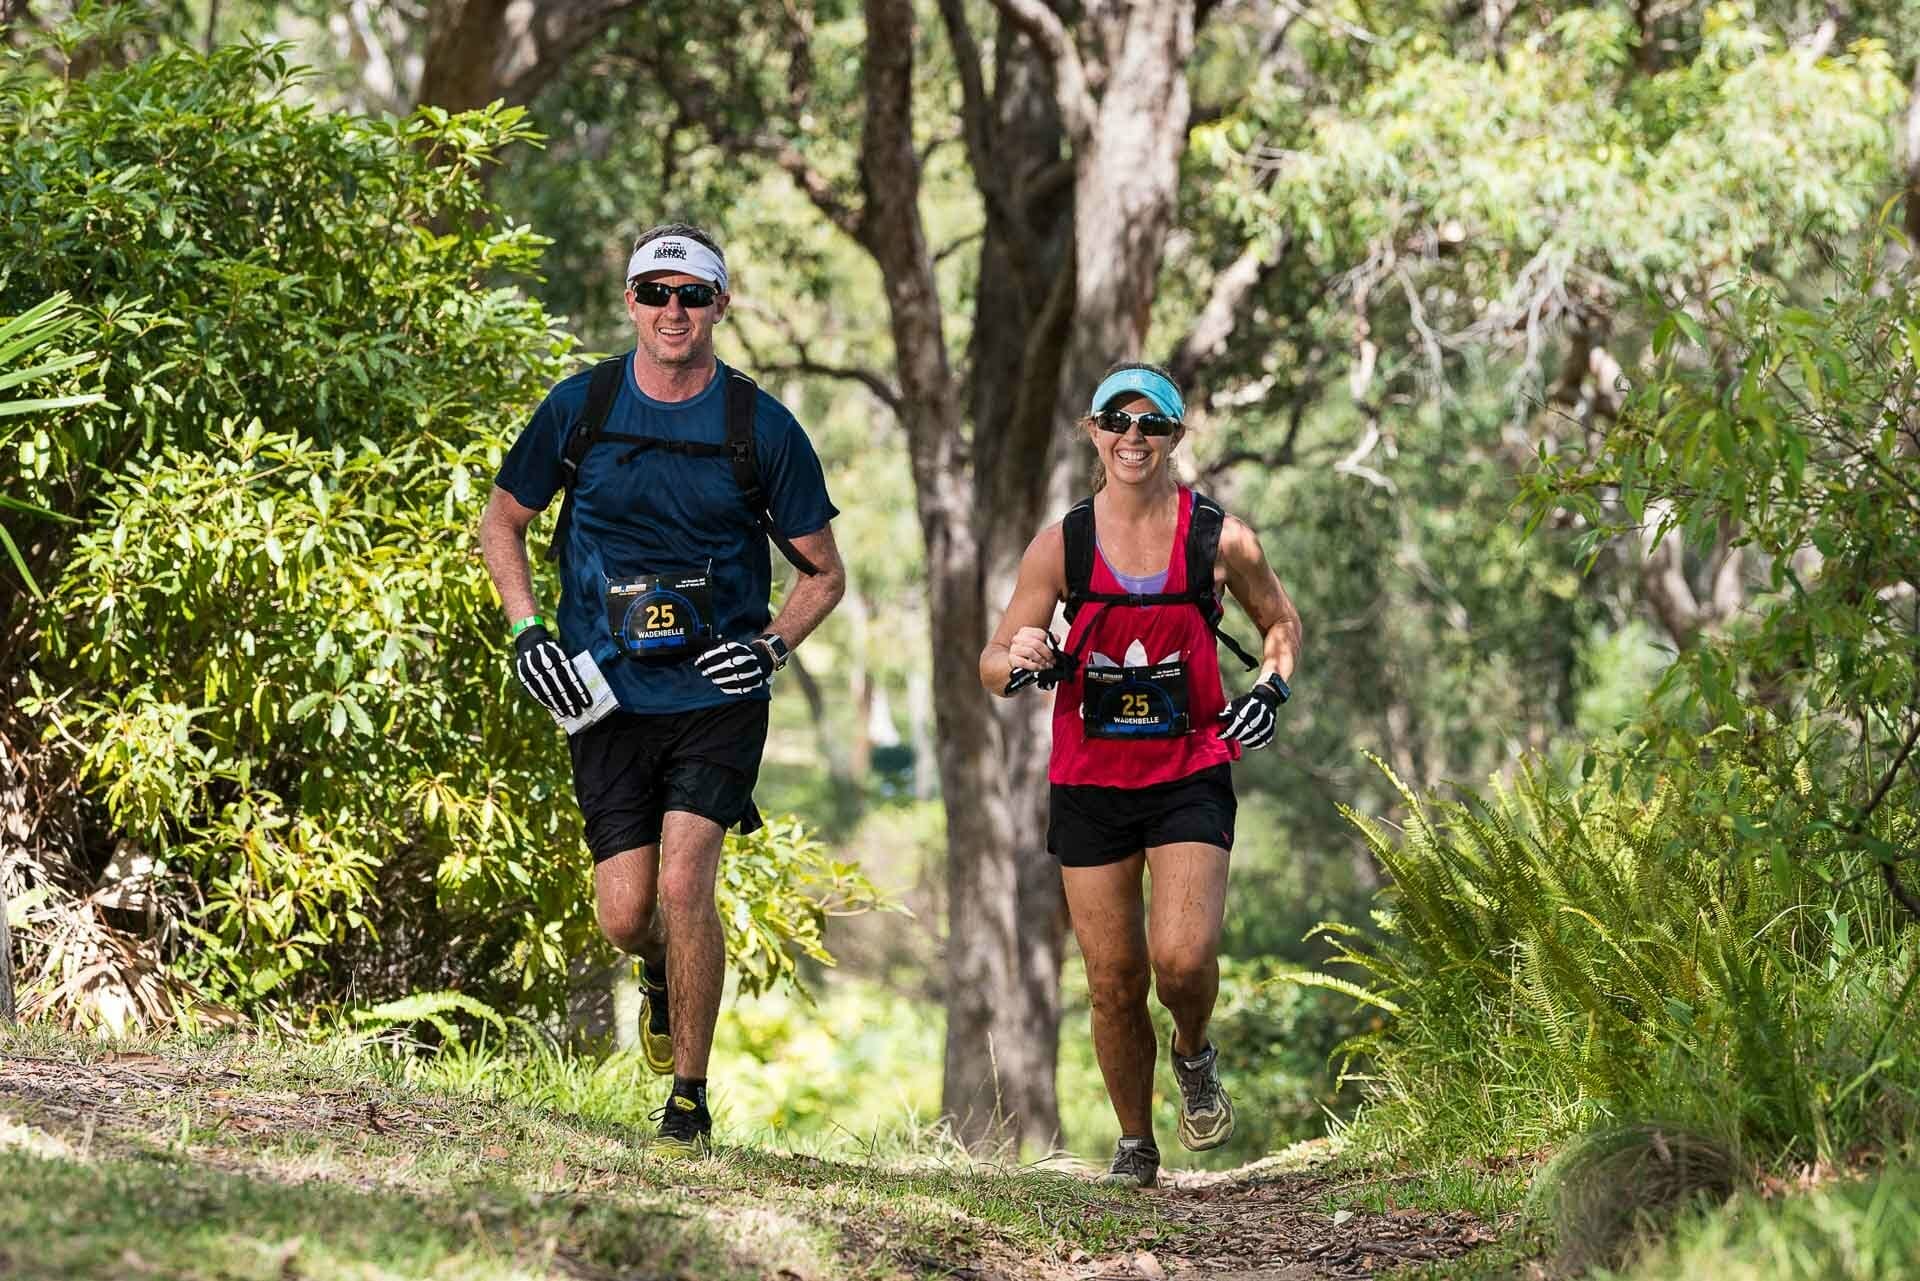 Enter the Lake Mac Adventure Race and Start 2021 Right, outer image collective, trail running